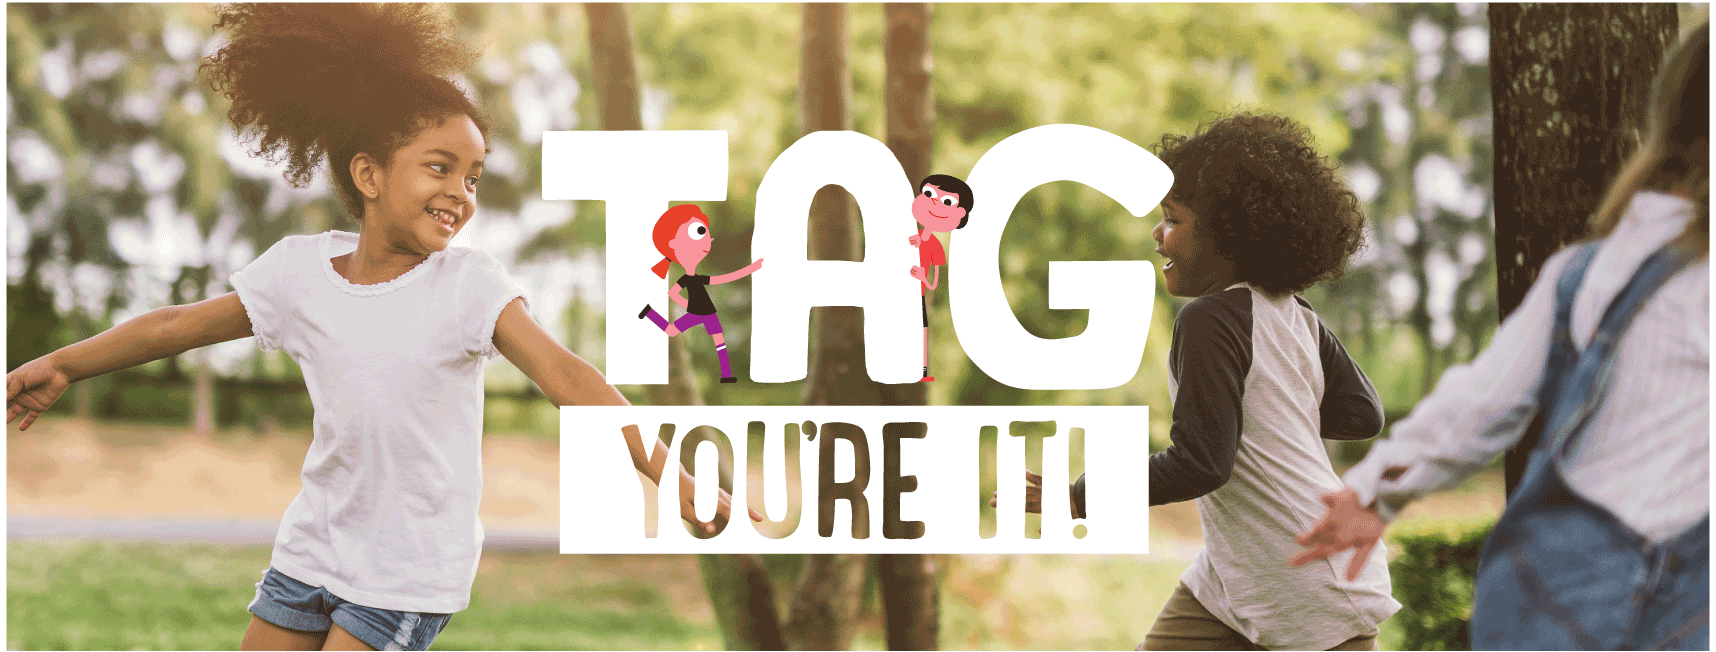 Sweepstakes - Tag You're It, Win a Summer Vacation for Kids and Family